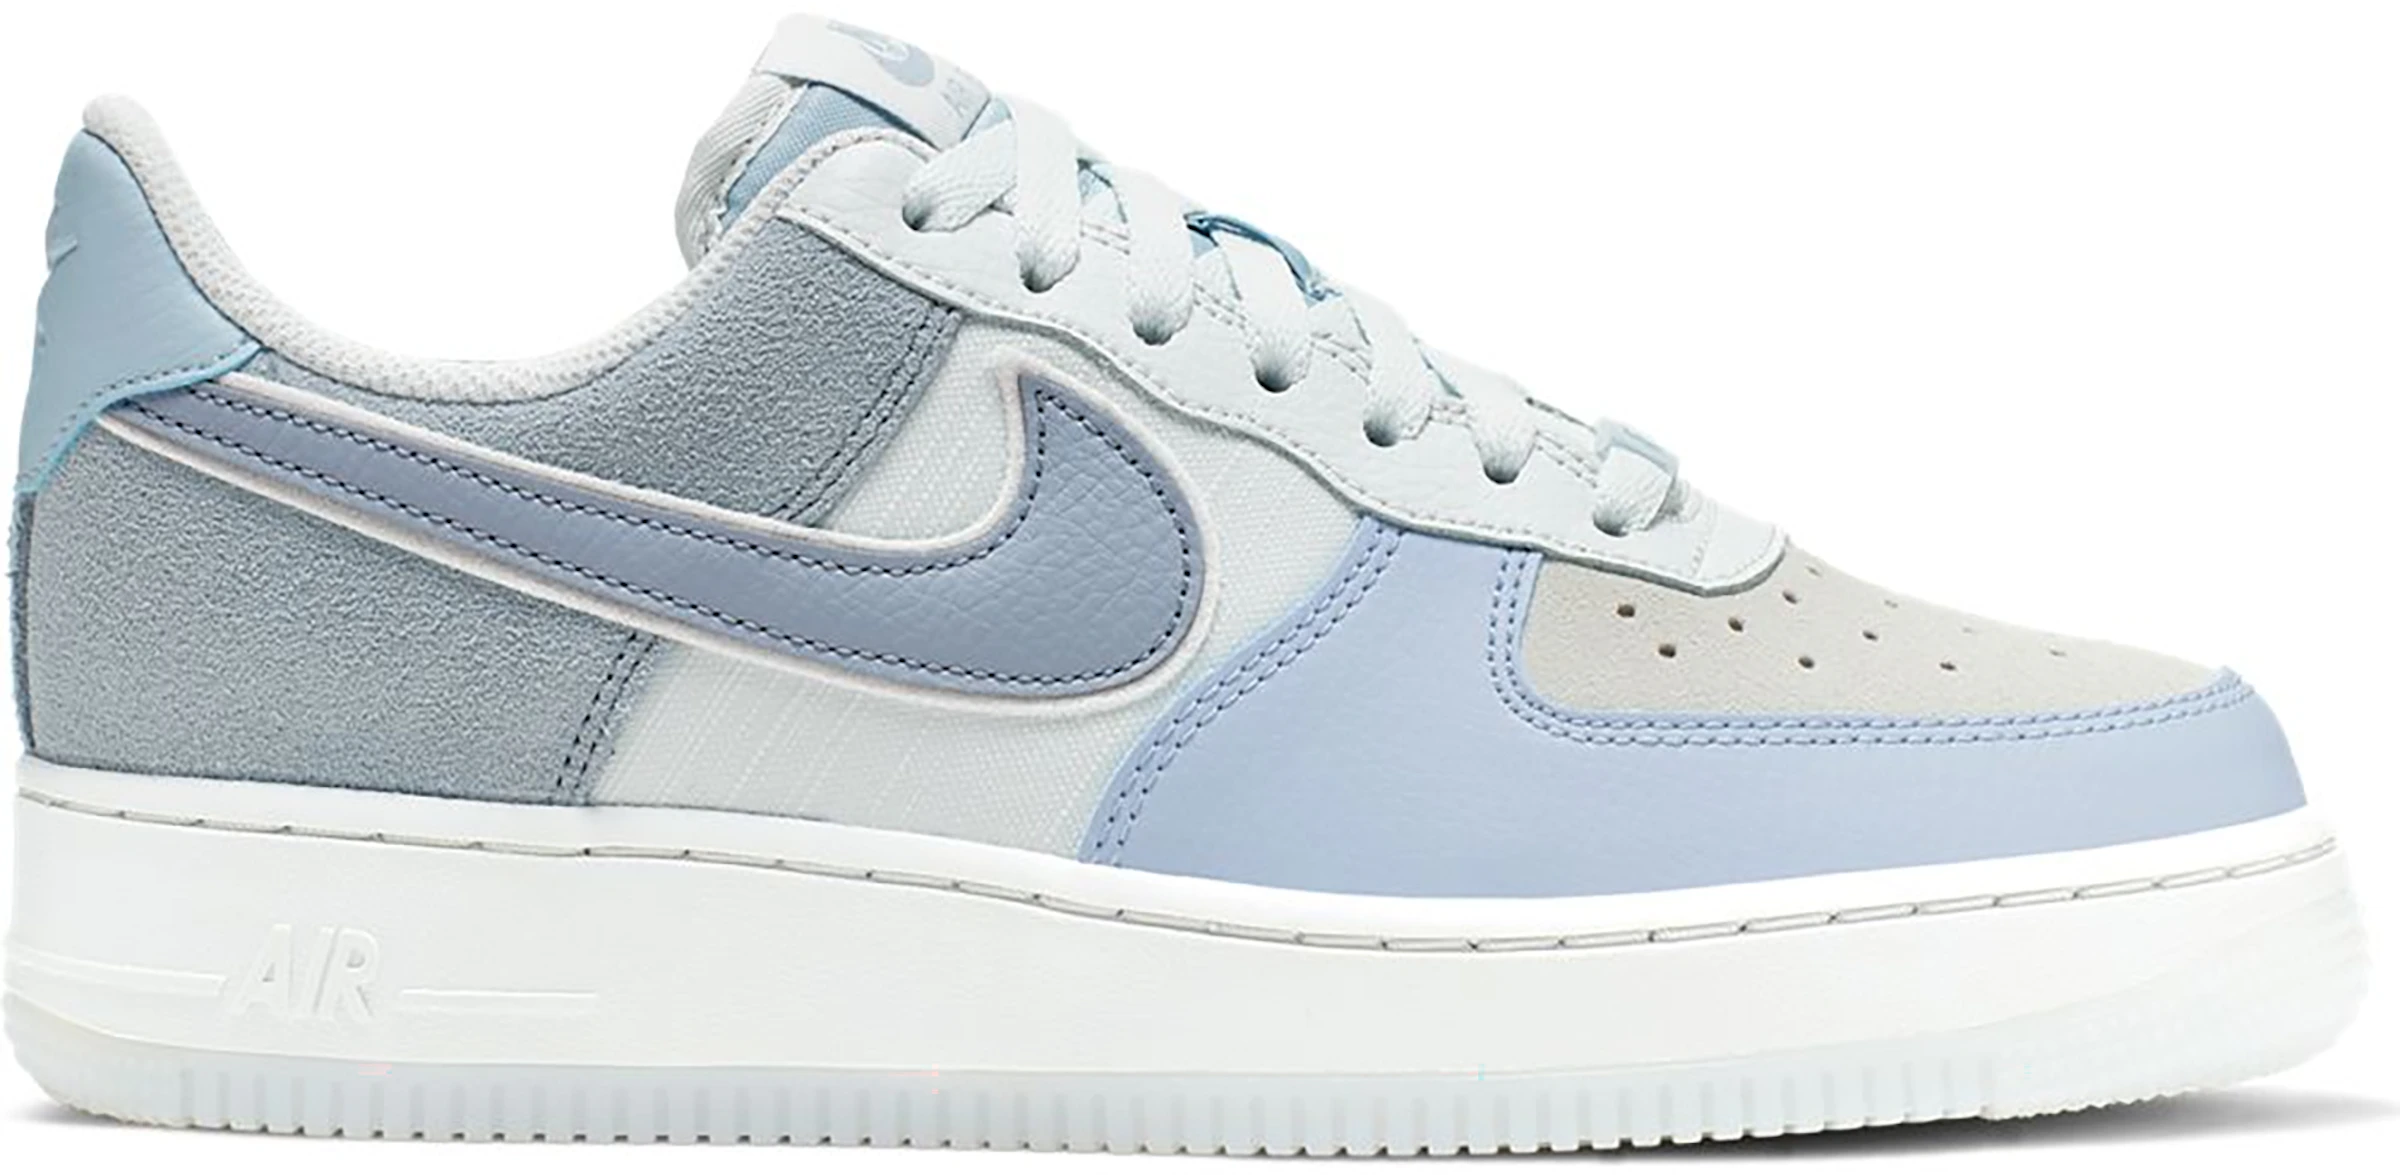 Nike Air Force 1 Low Light Armory Blue (W) - 896185-401